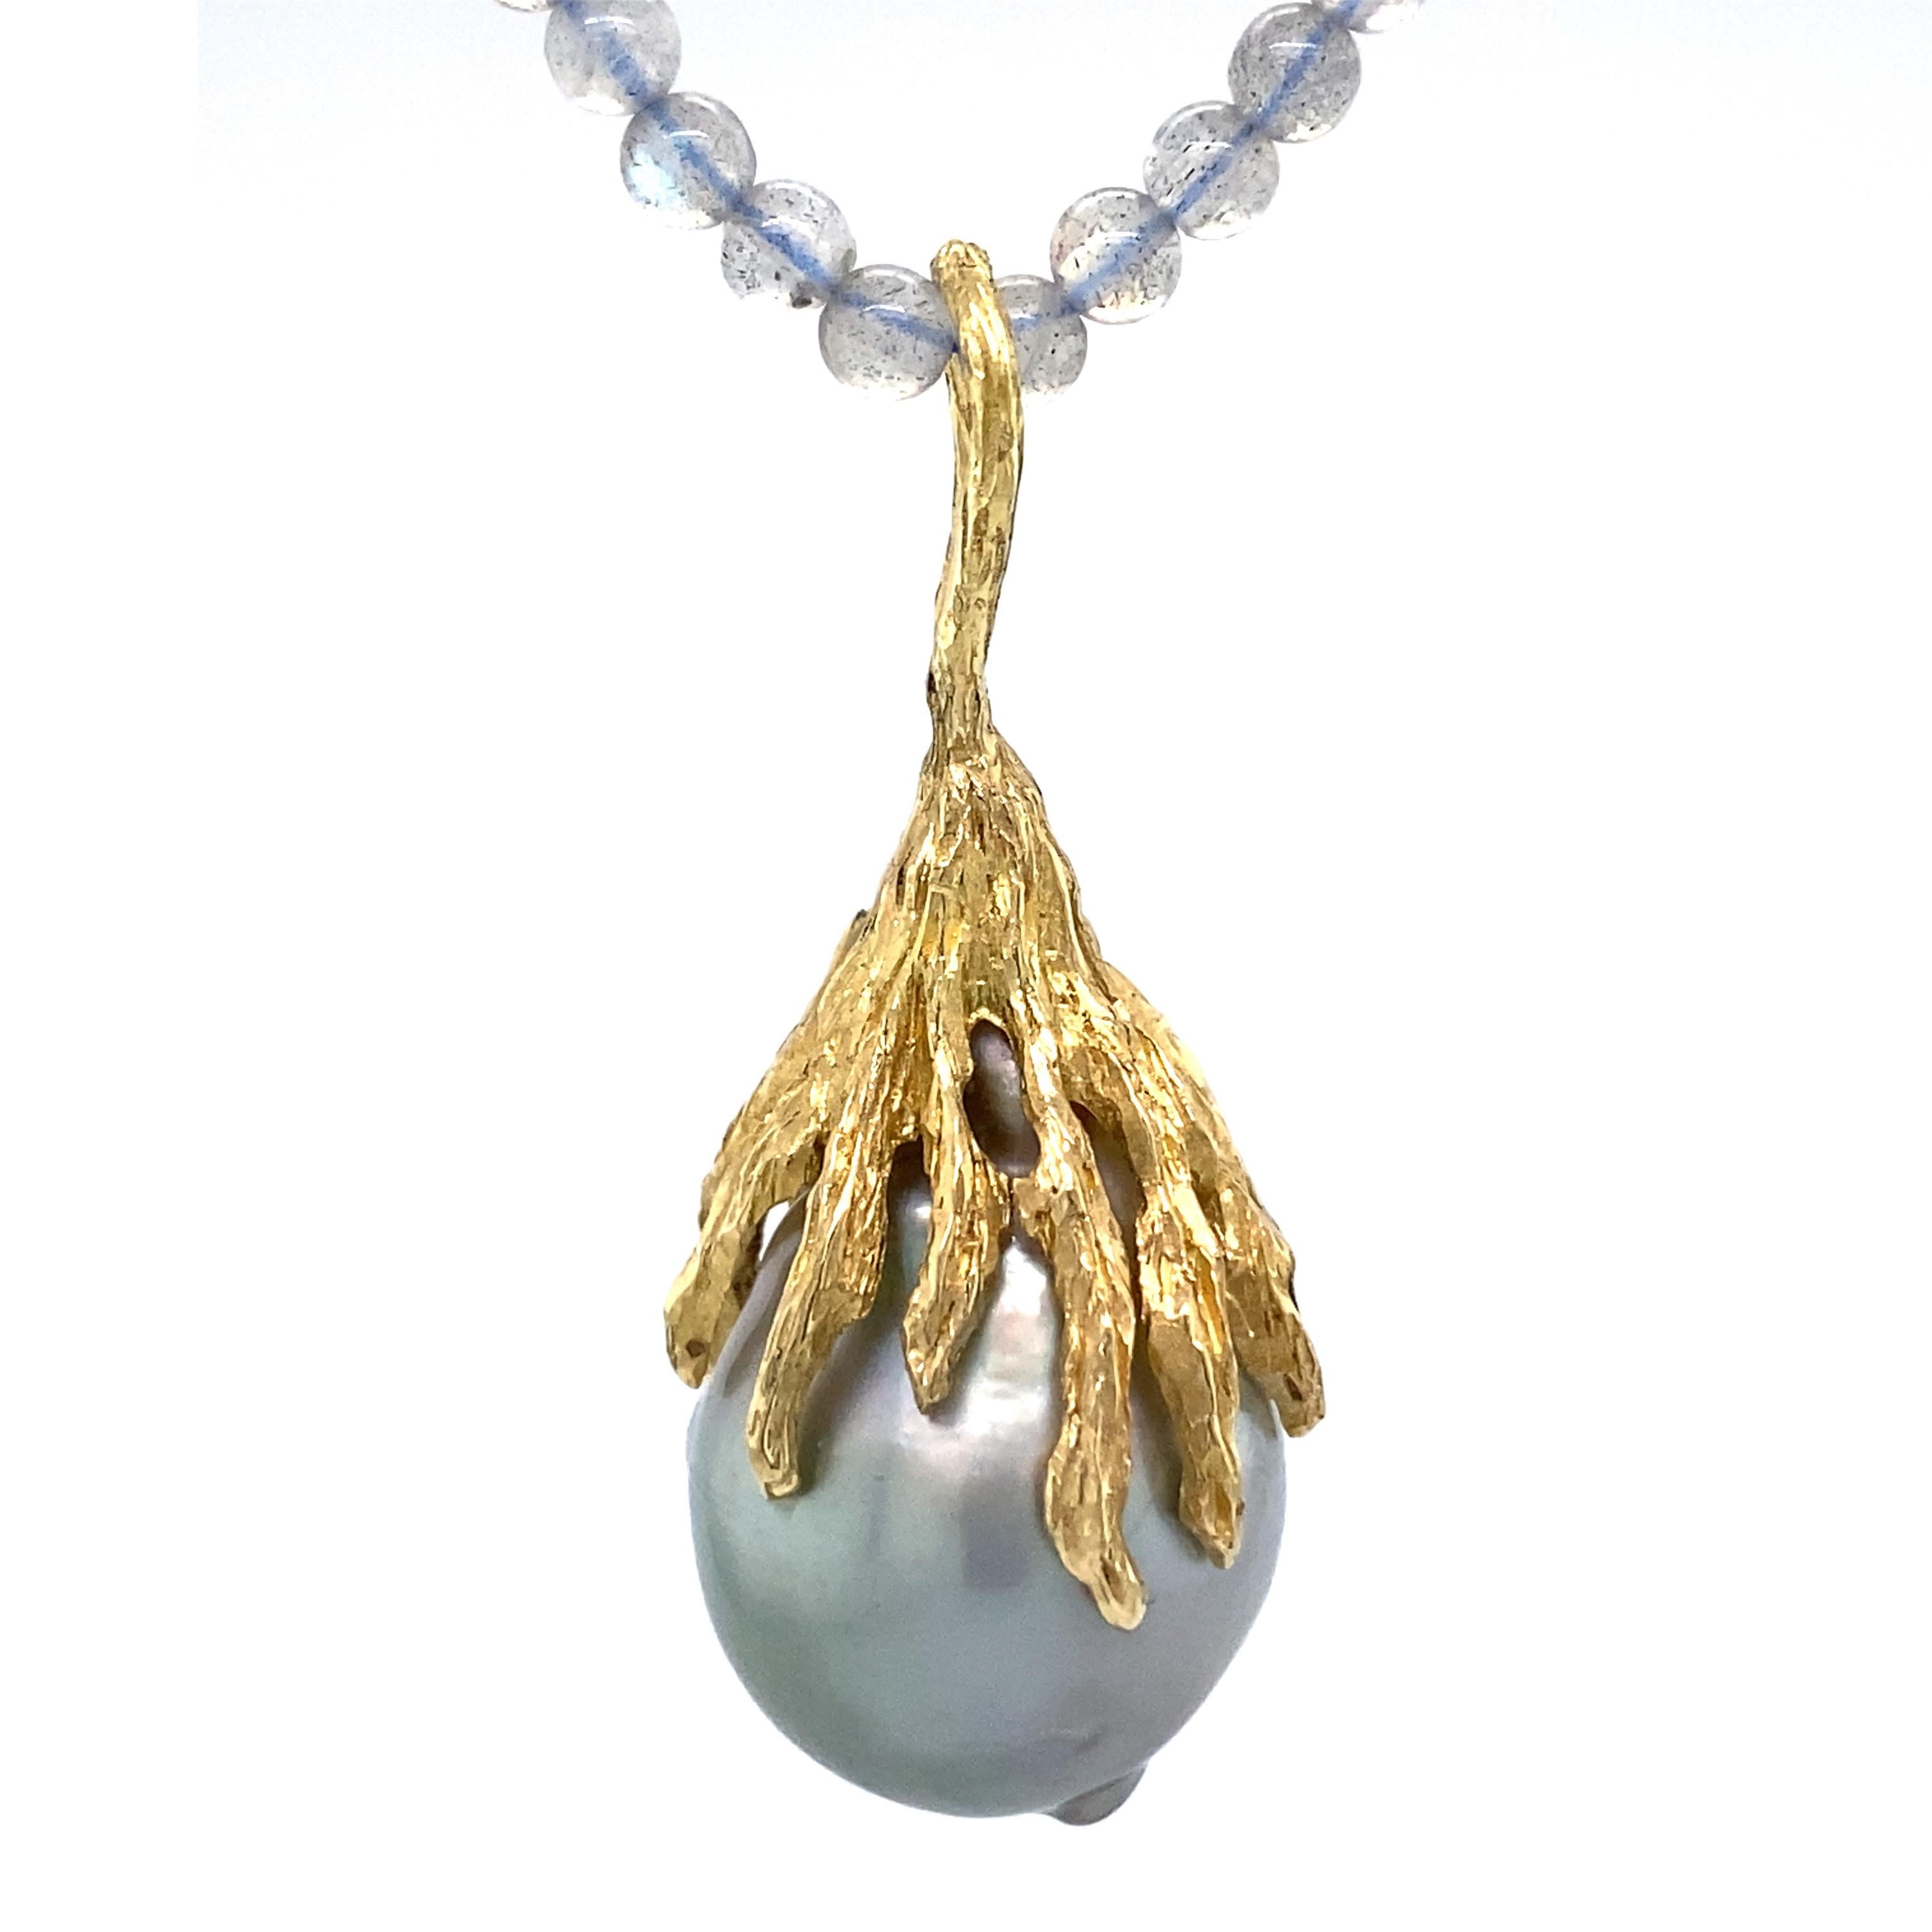 This gorgeous, shimmery, one-of-a-kind pendant by Eytan Brandes features a huge, astounding silver-blue baroque Tahitian pearl -- over 16mm wide.  

We purchased this pearl from Seven Seas Pearls in downtown Los Angeles.  Seven Seas only sells